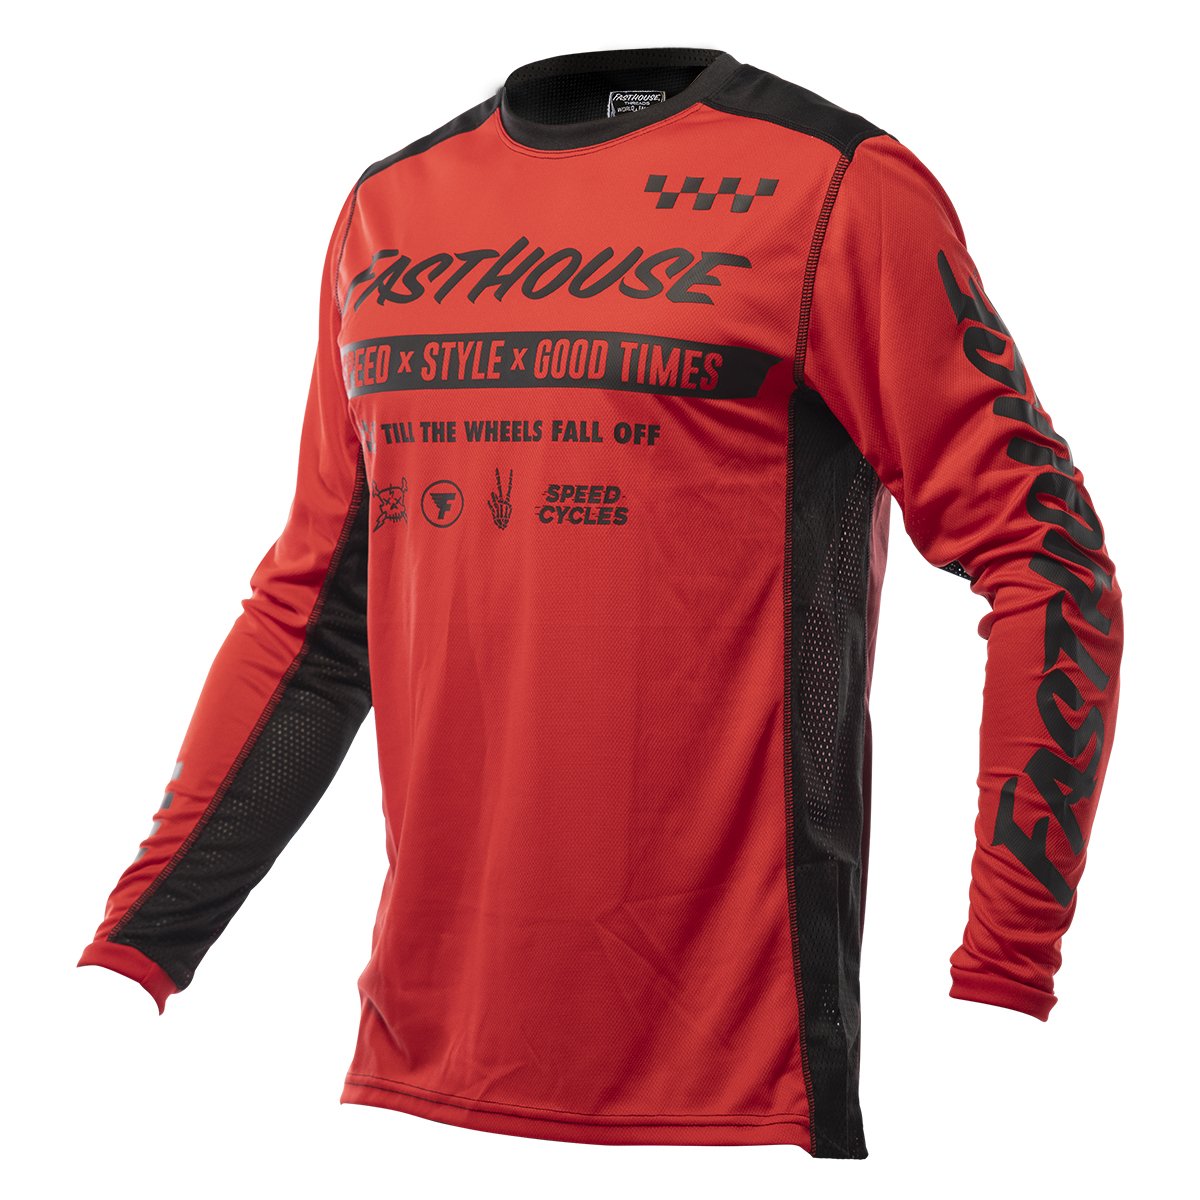 Grindhouse Domingo Jersey - Red